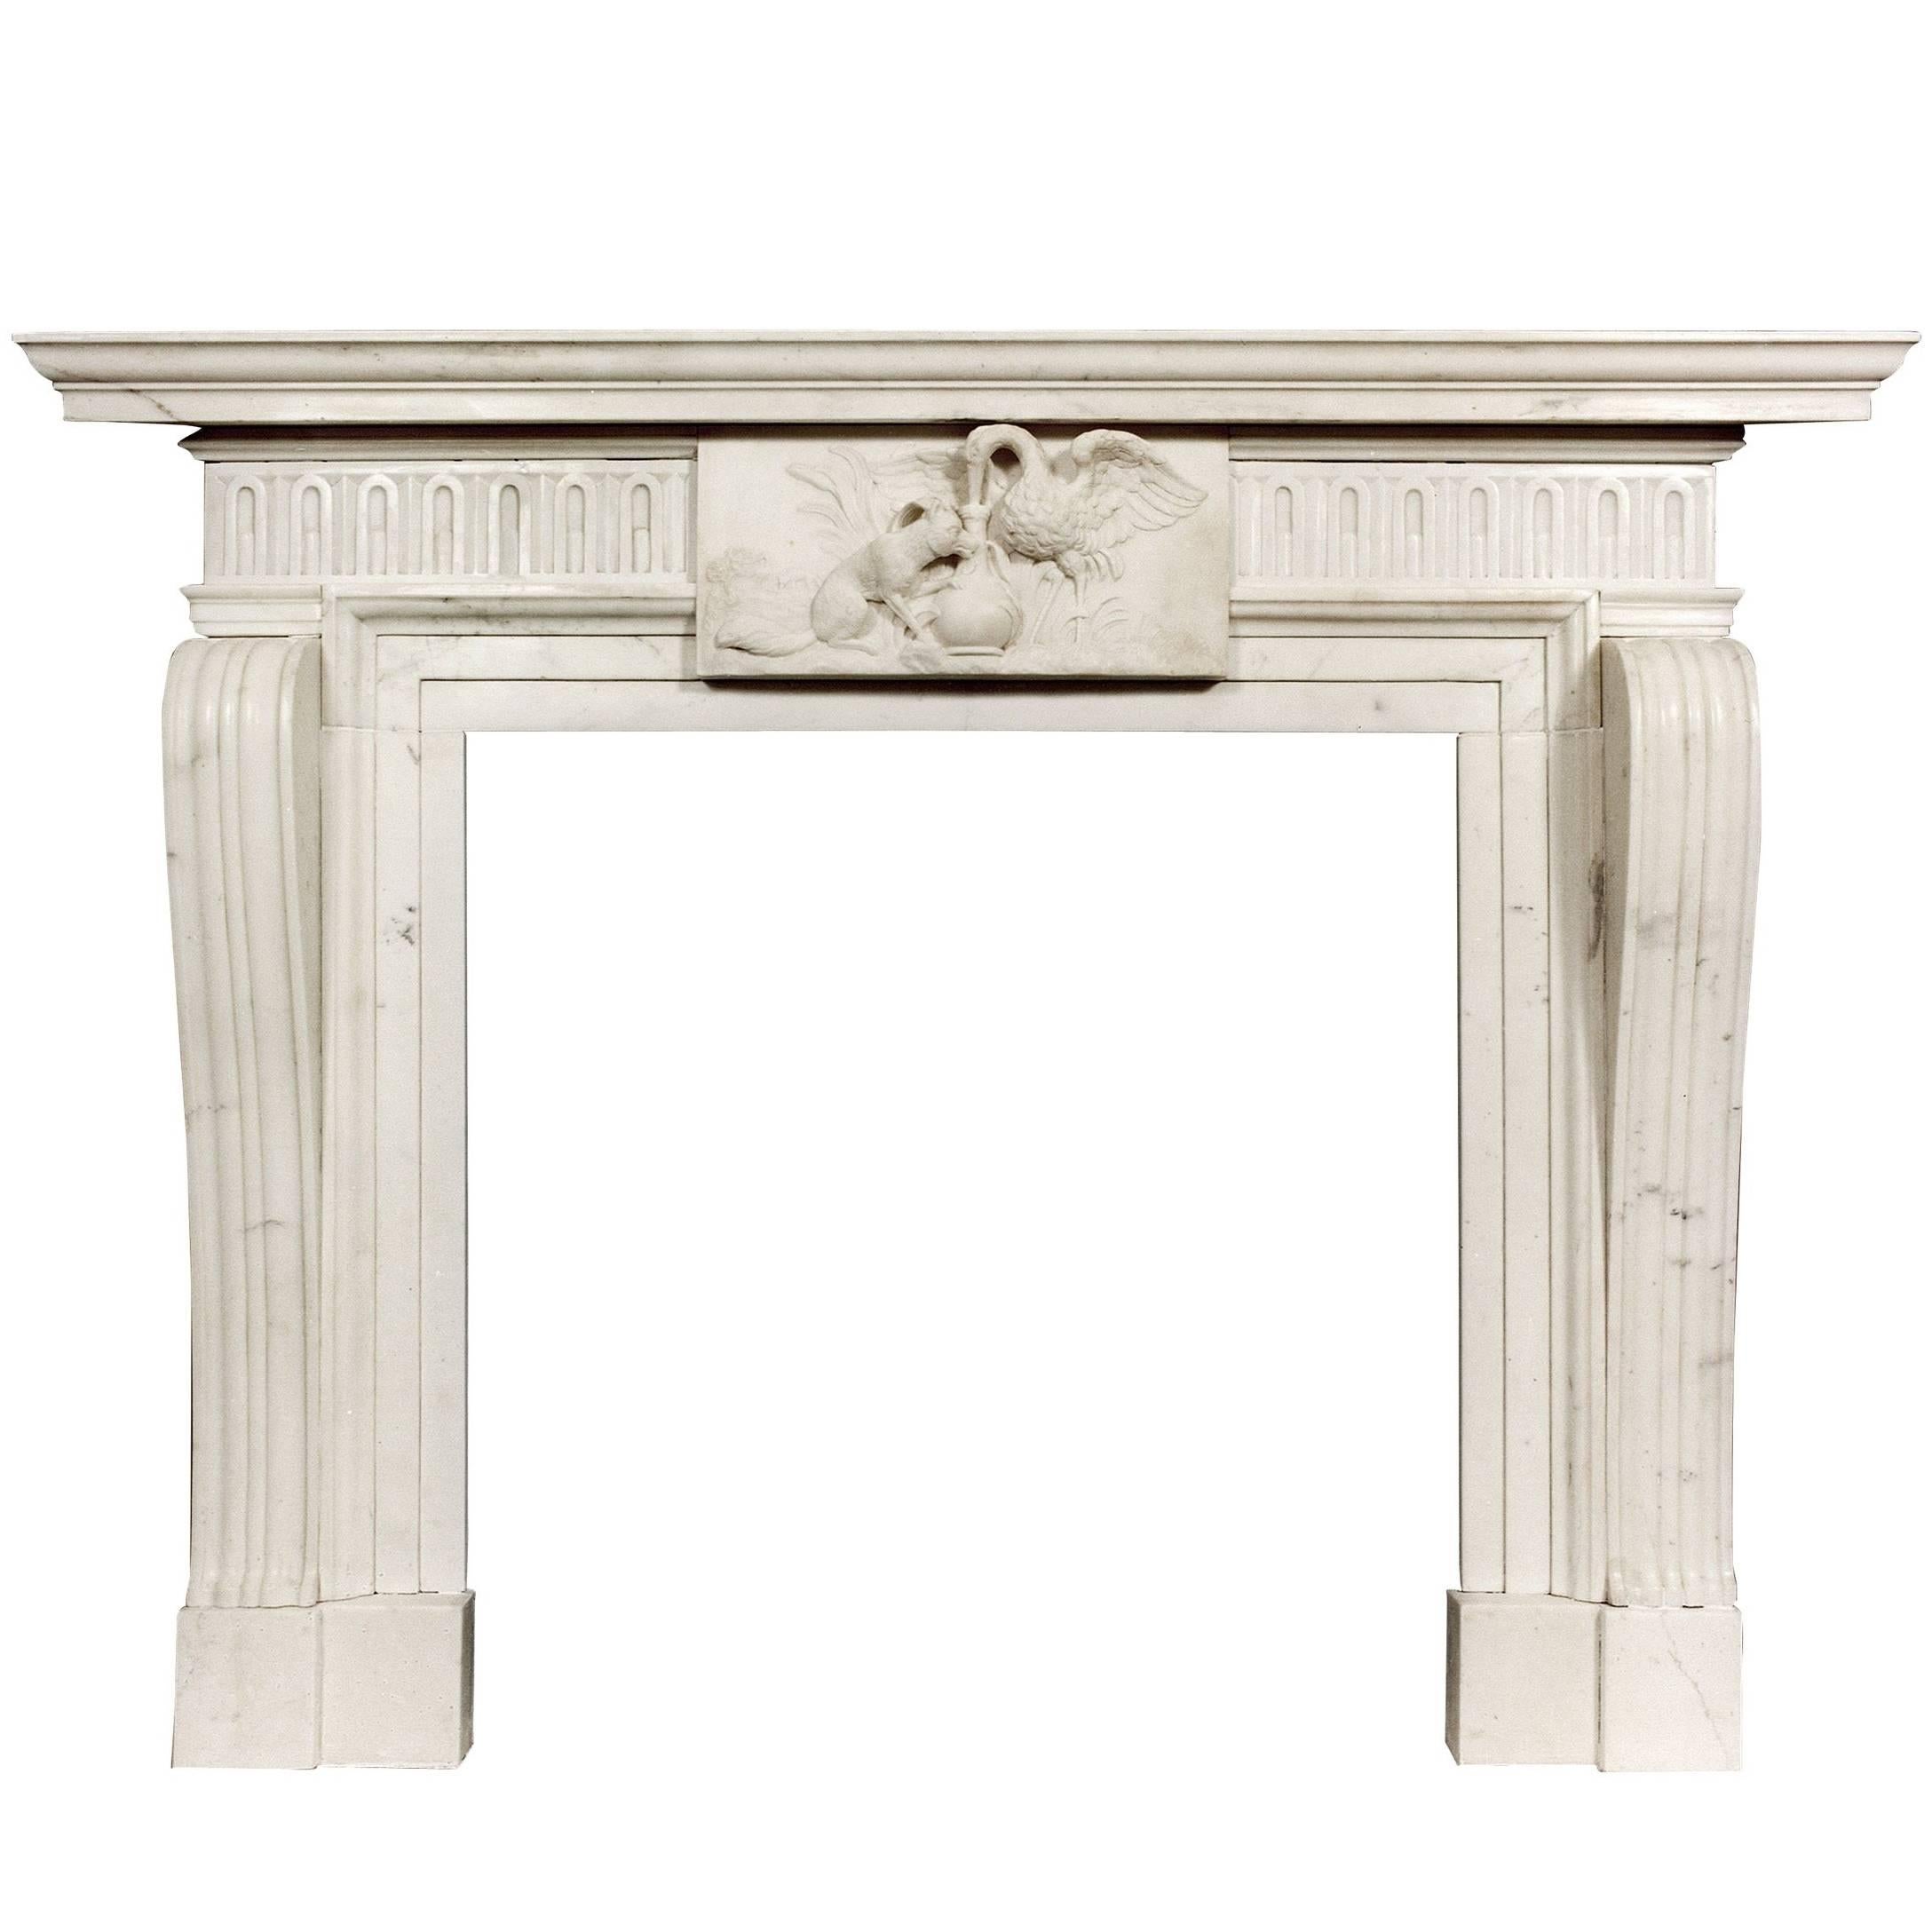 Well Carved Antique English Statuary White Marble Fireplace